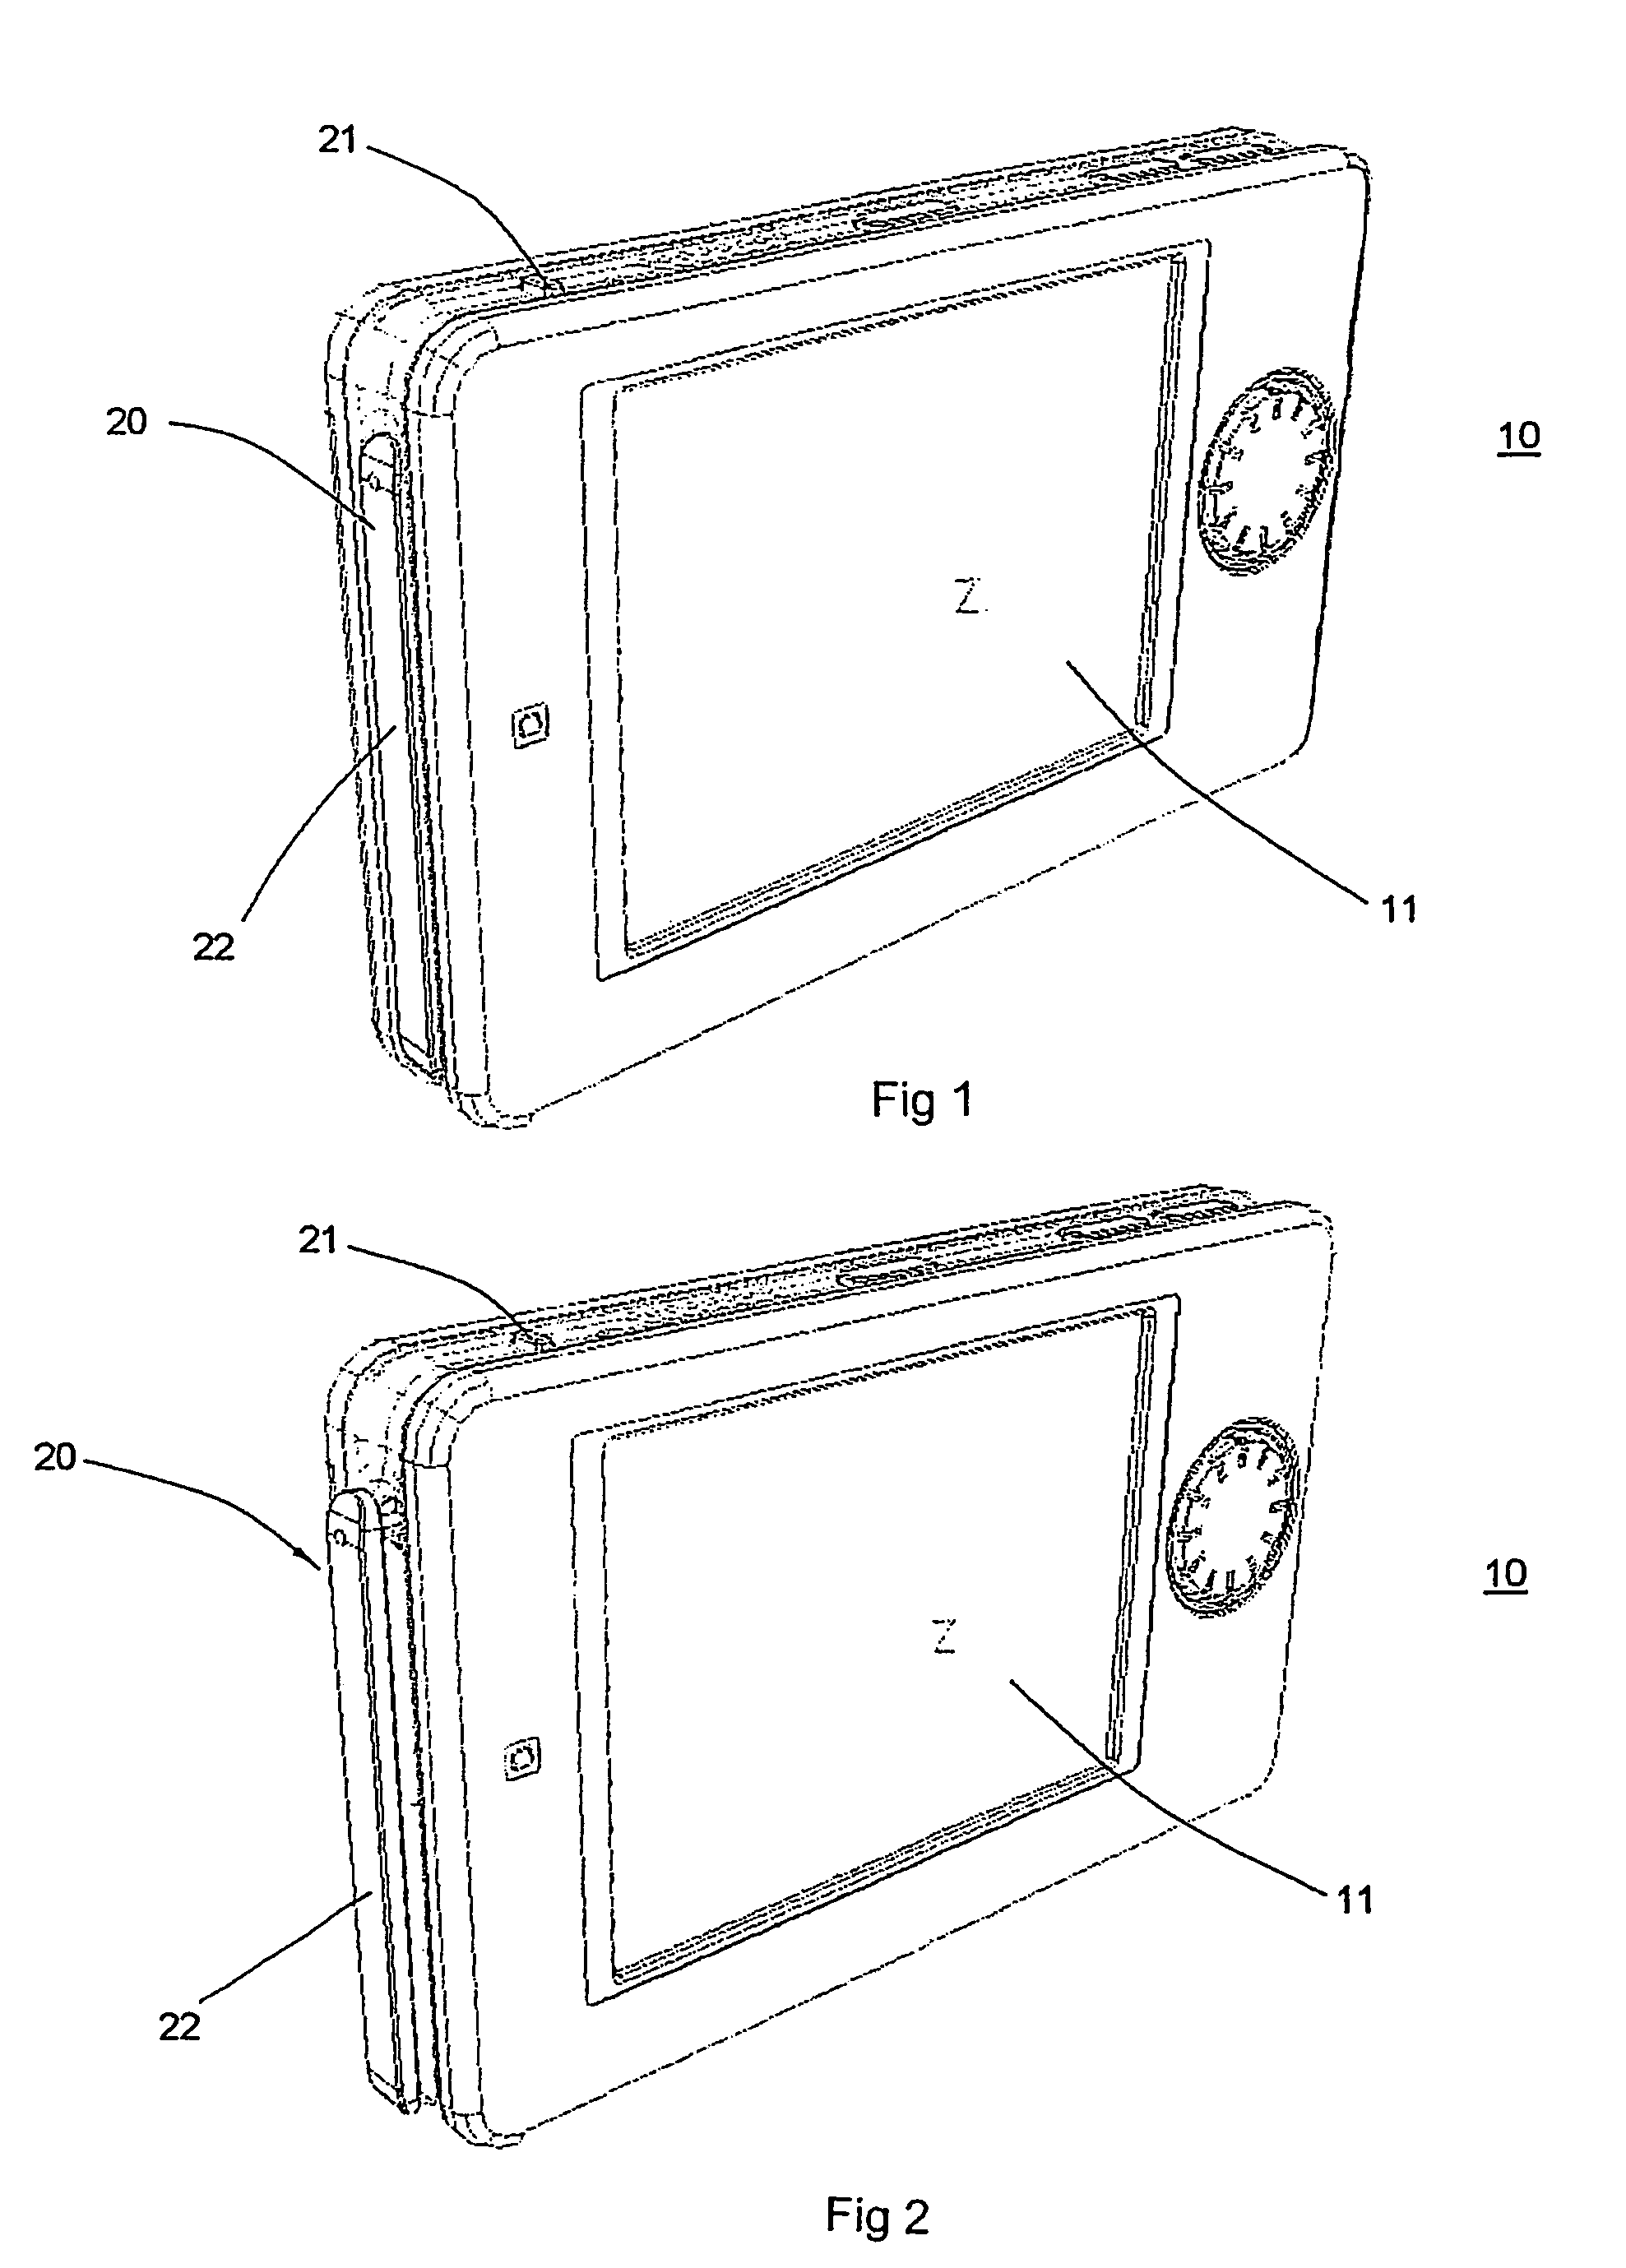 Foot stand assembly with multi-viewing angles